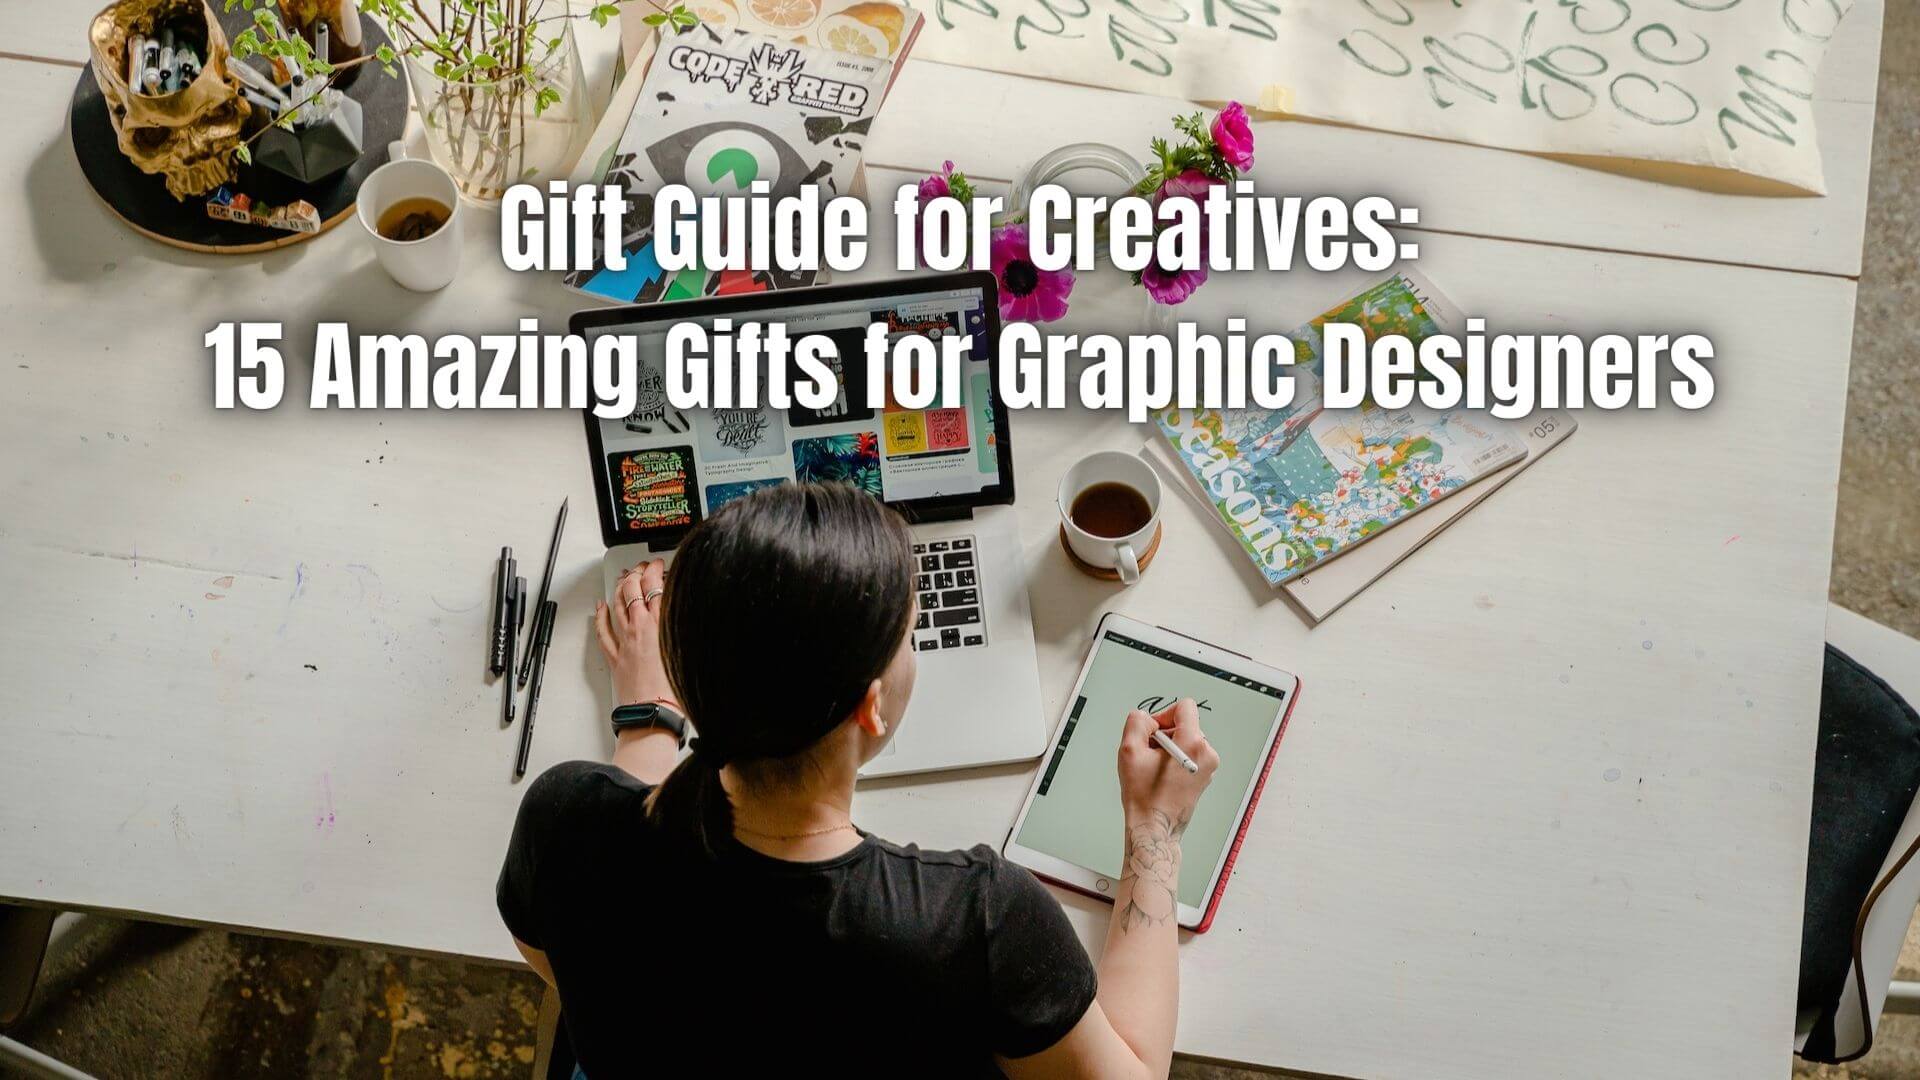 Are you looking for the perfect gift to show appreciation for graphic designers? Here are 15 amazing gifts that graphic designers would love.